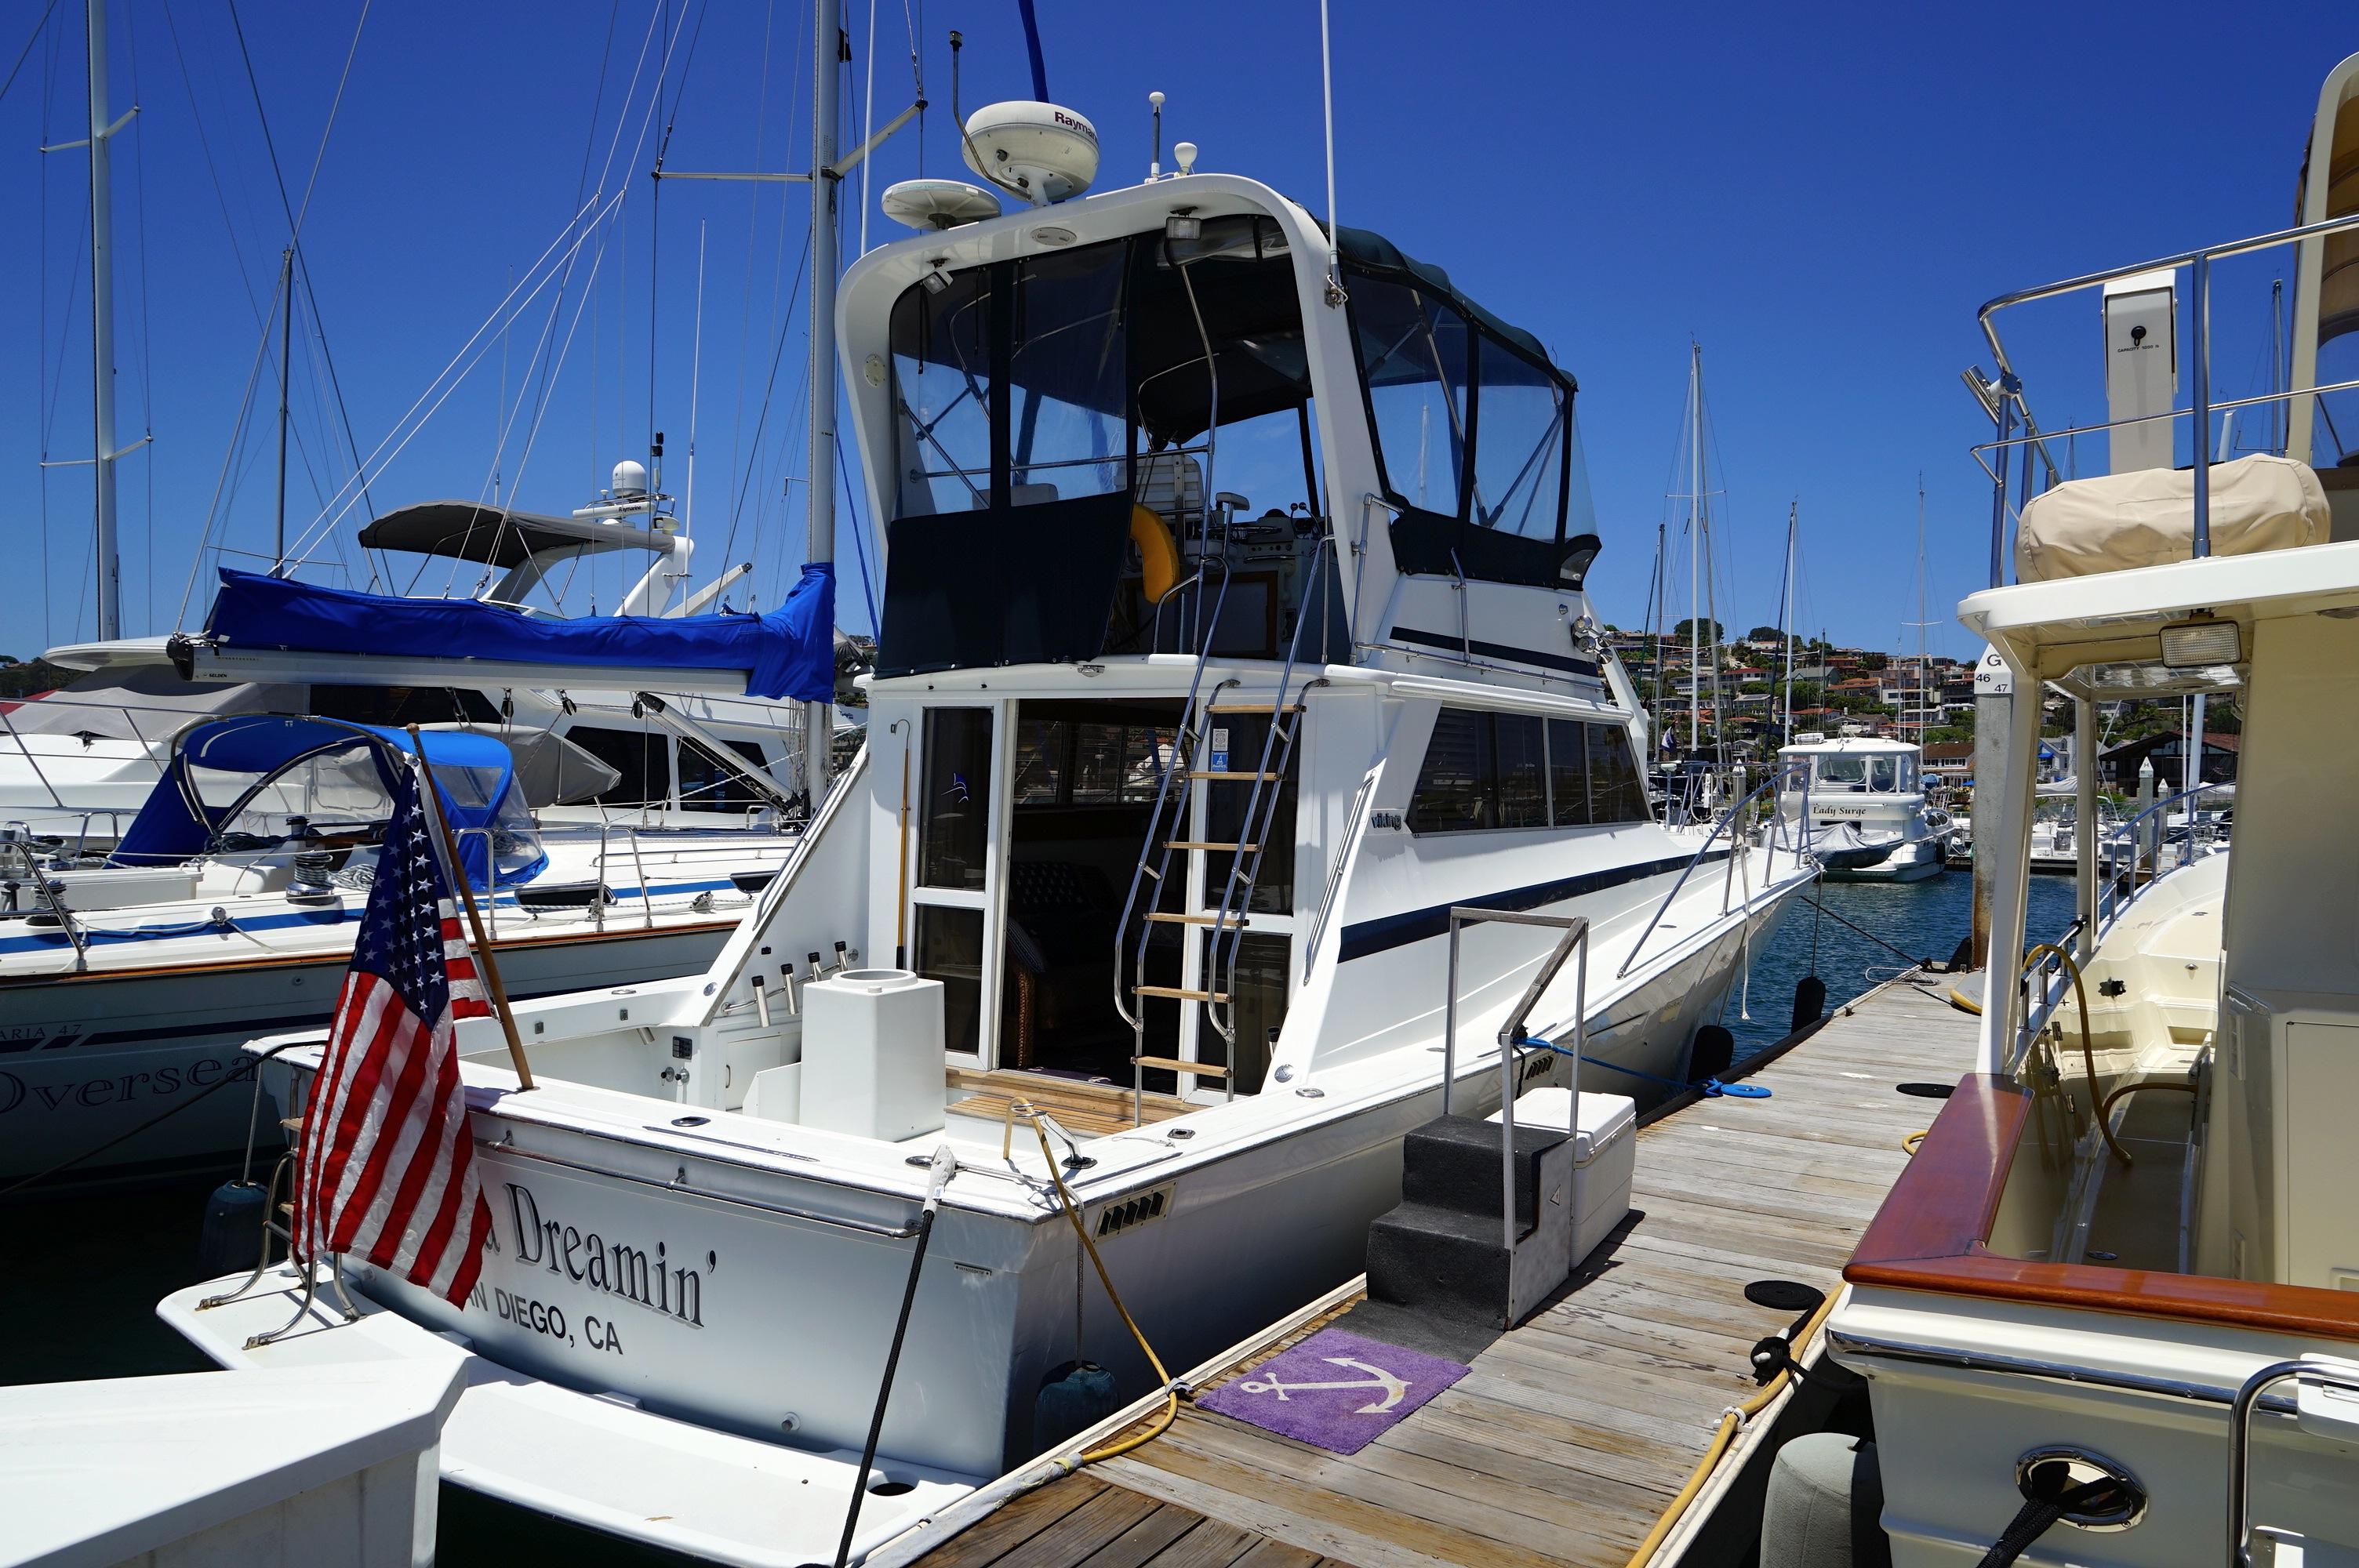 40 Foot Boats for Sale in CA | Boat listings